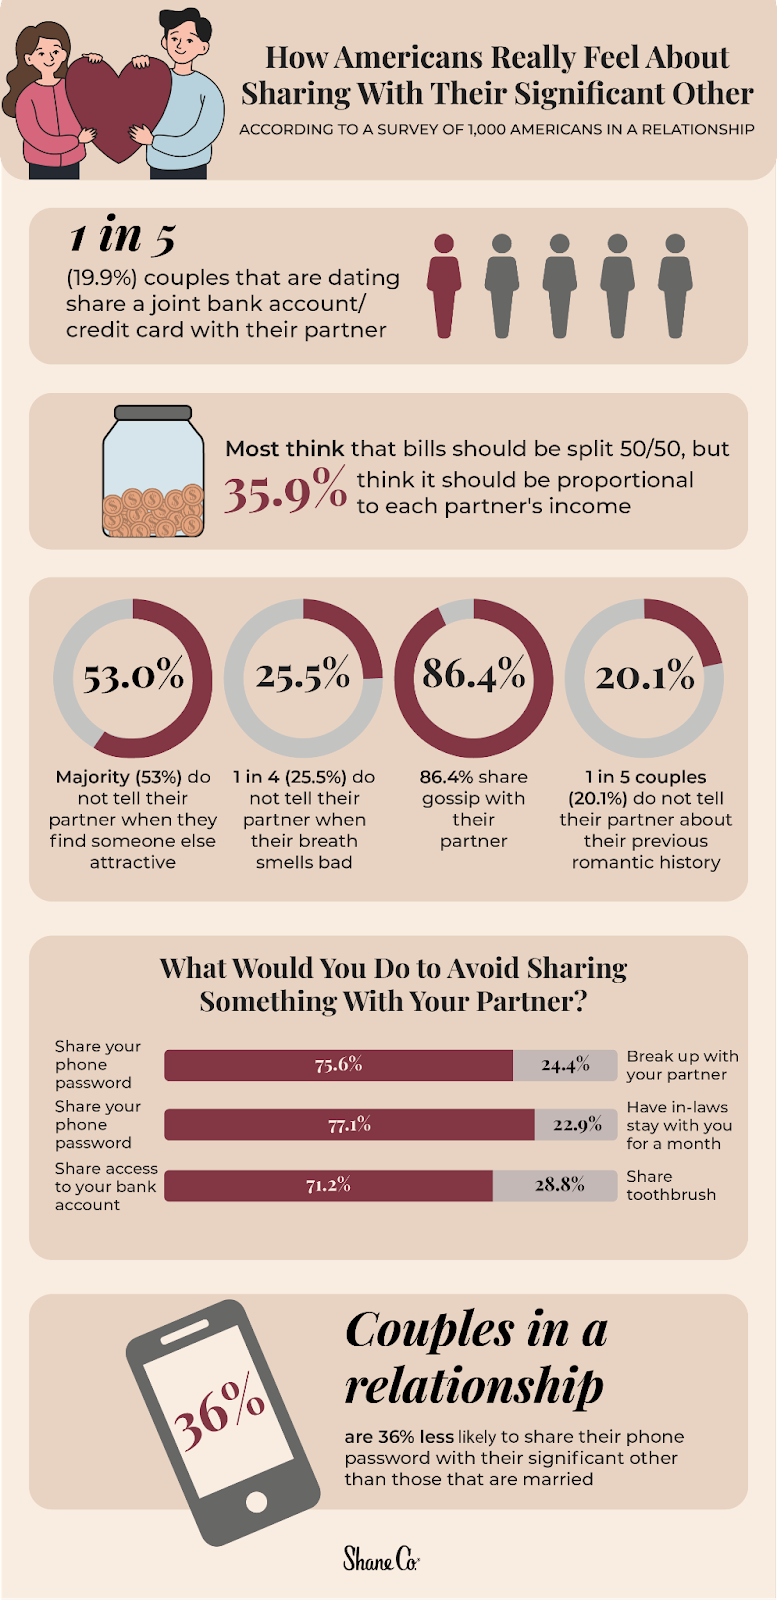 Infographic showing survey insights on sharing with a partner